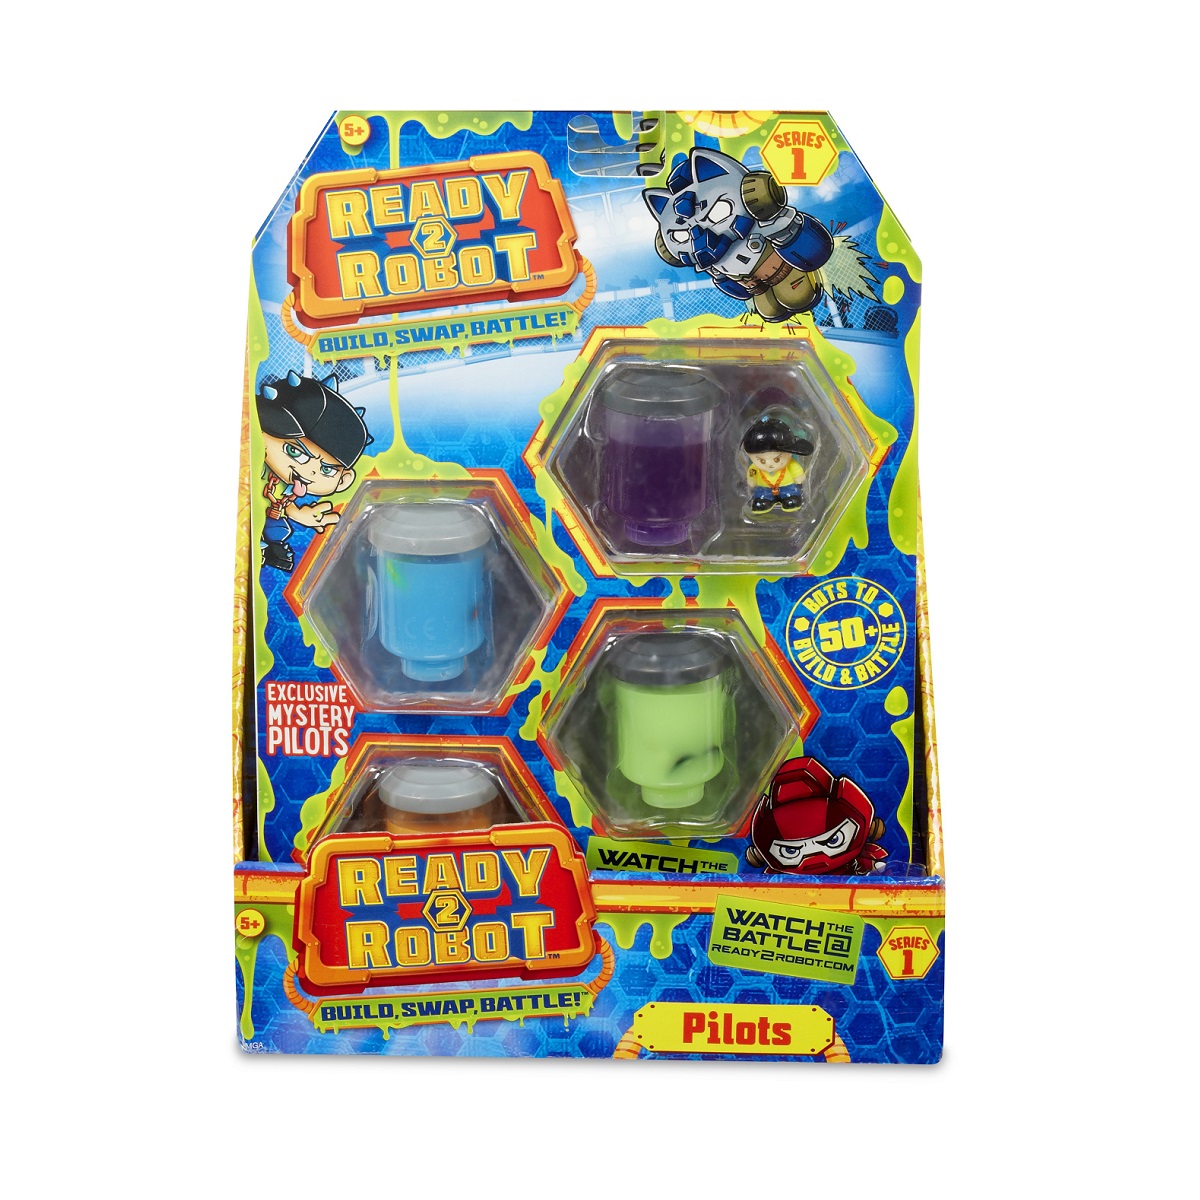 Ready2Robot Pilots Series 1 (Mystery Pack)